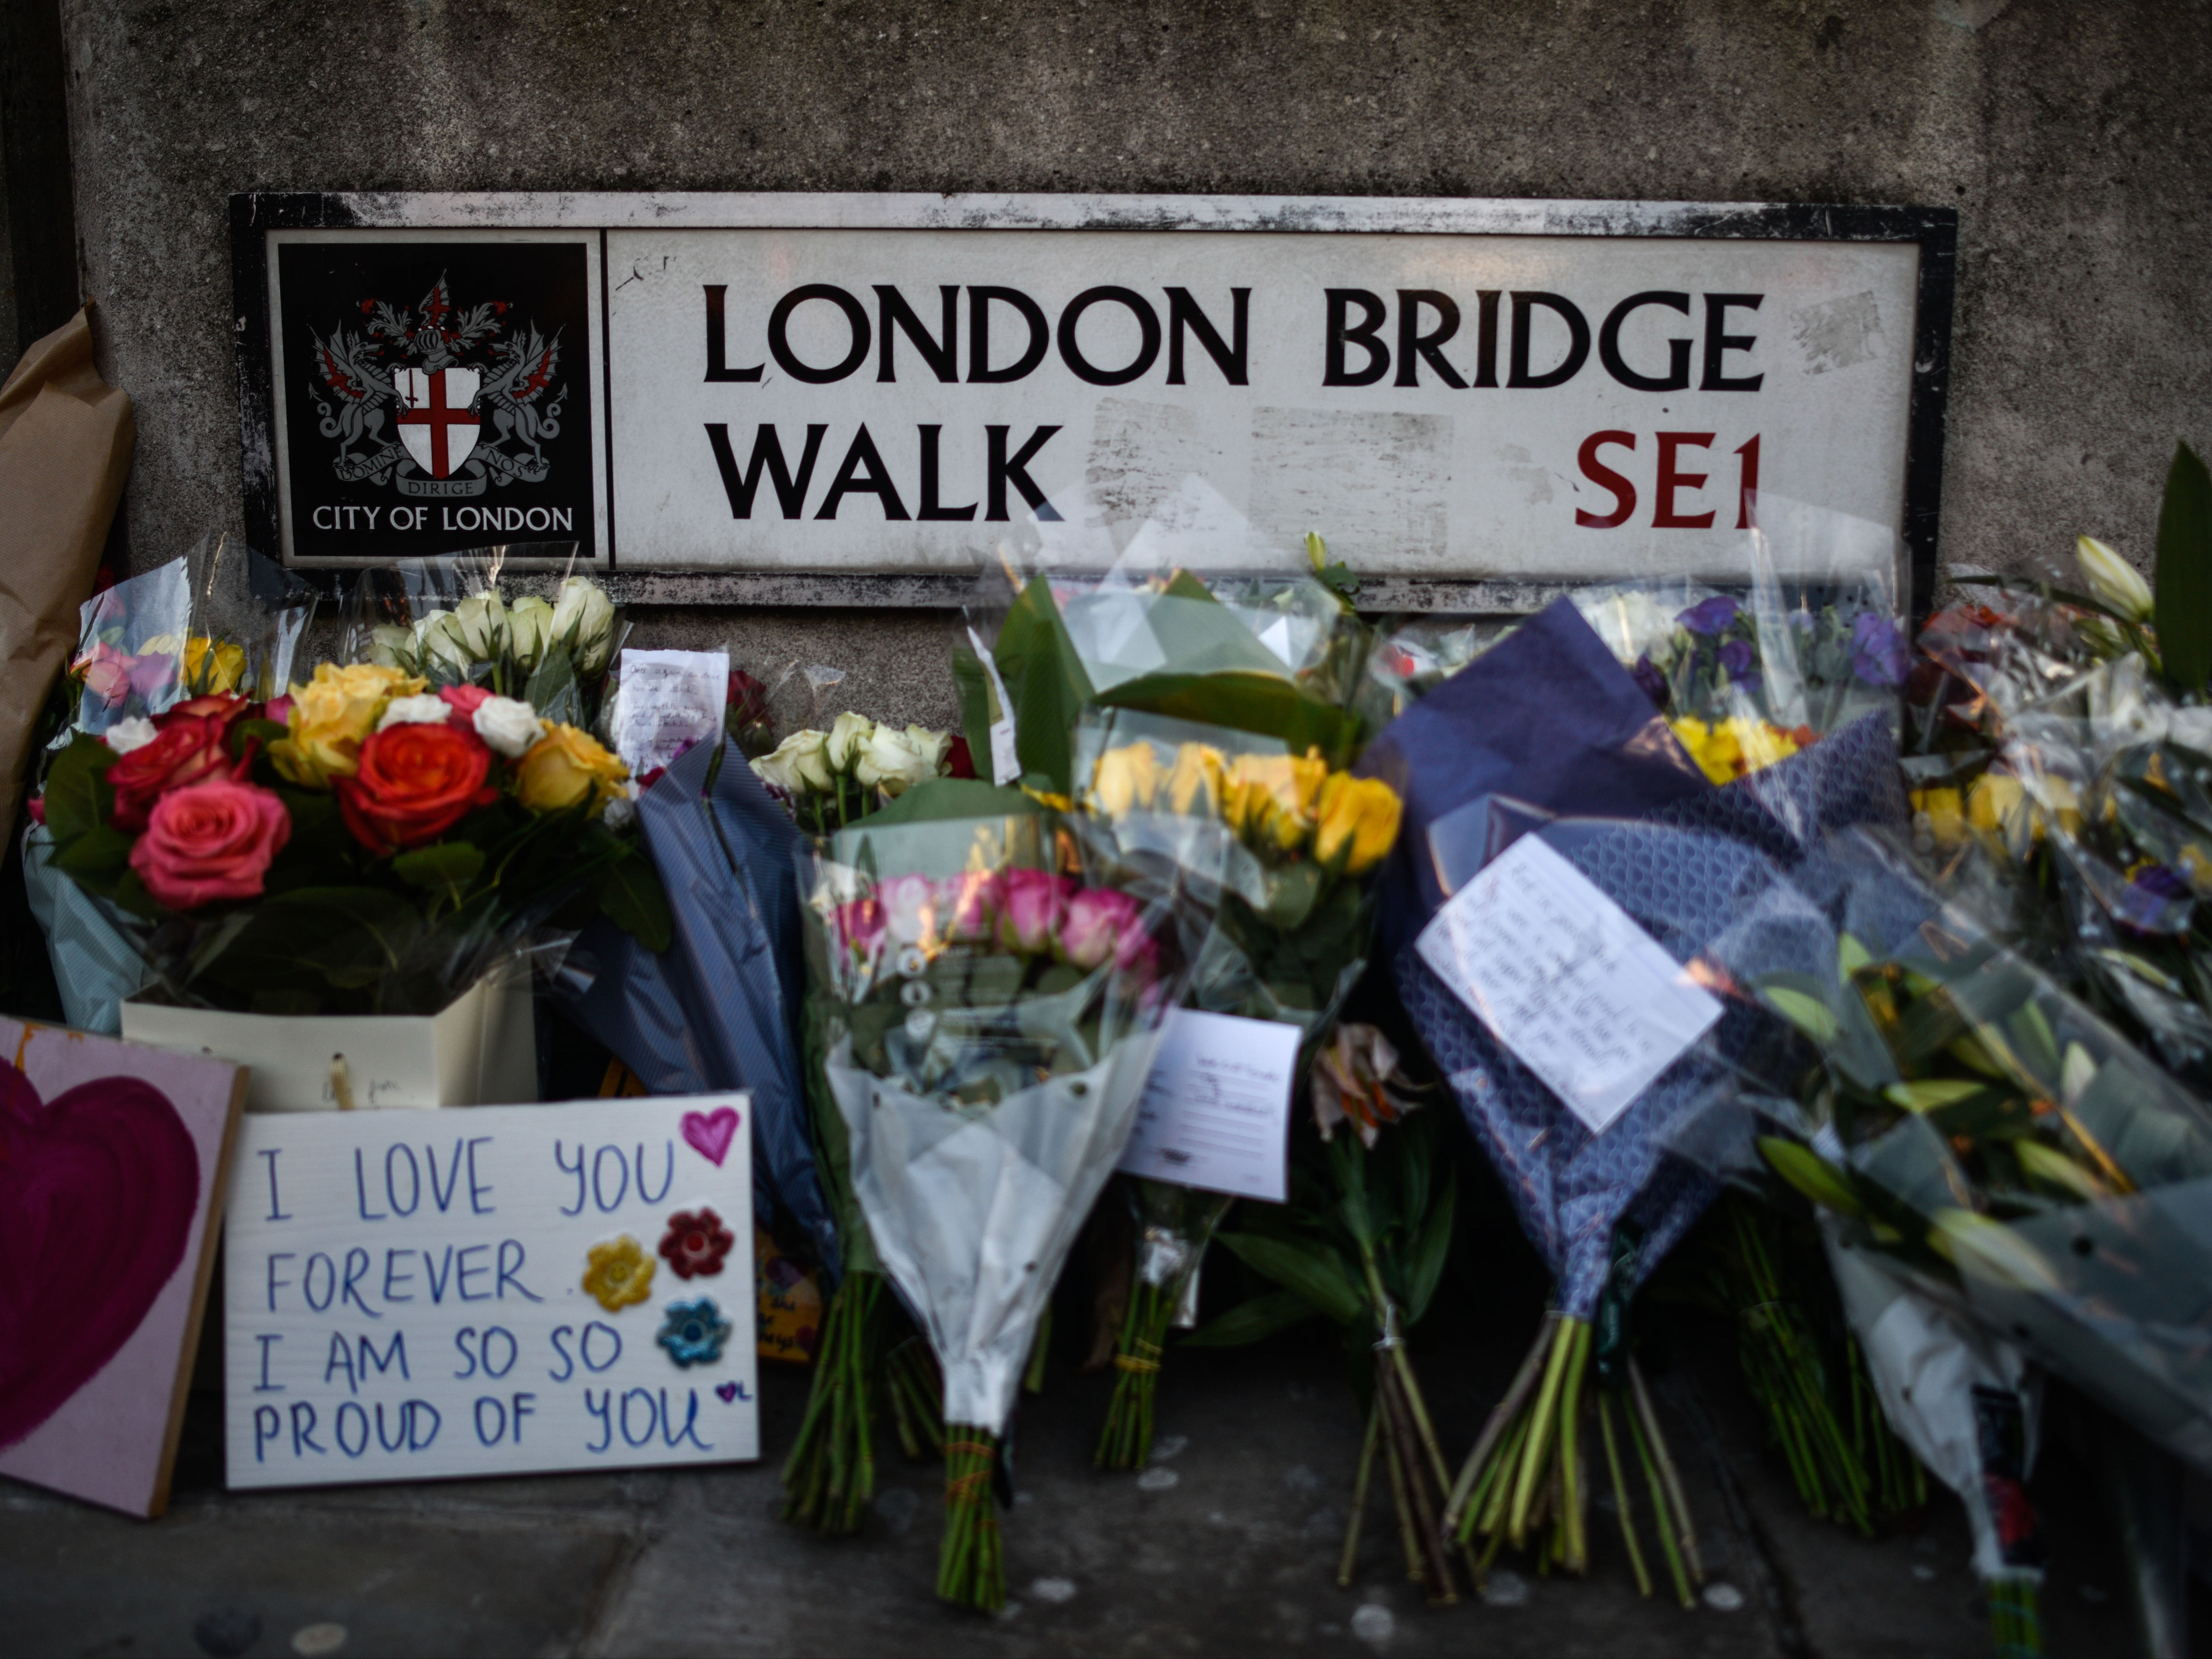 Floral tributes are left for Jack Merritt and Saskia Jones, who were killed in a terror attack on 29 November 2019